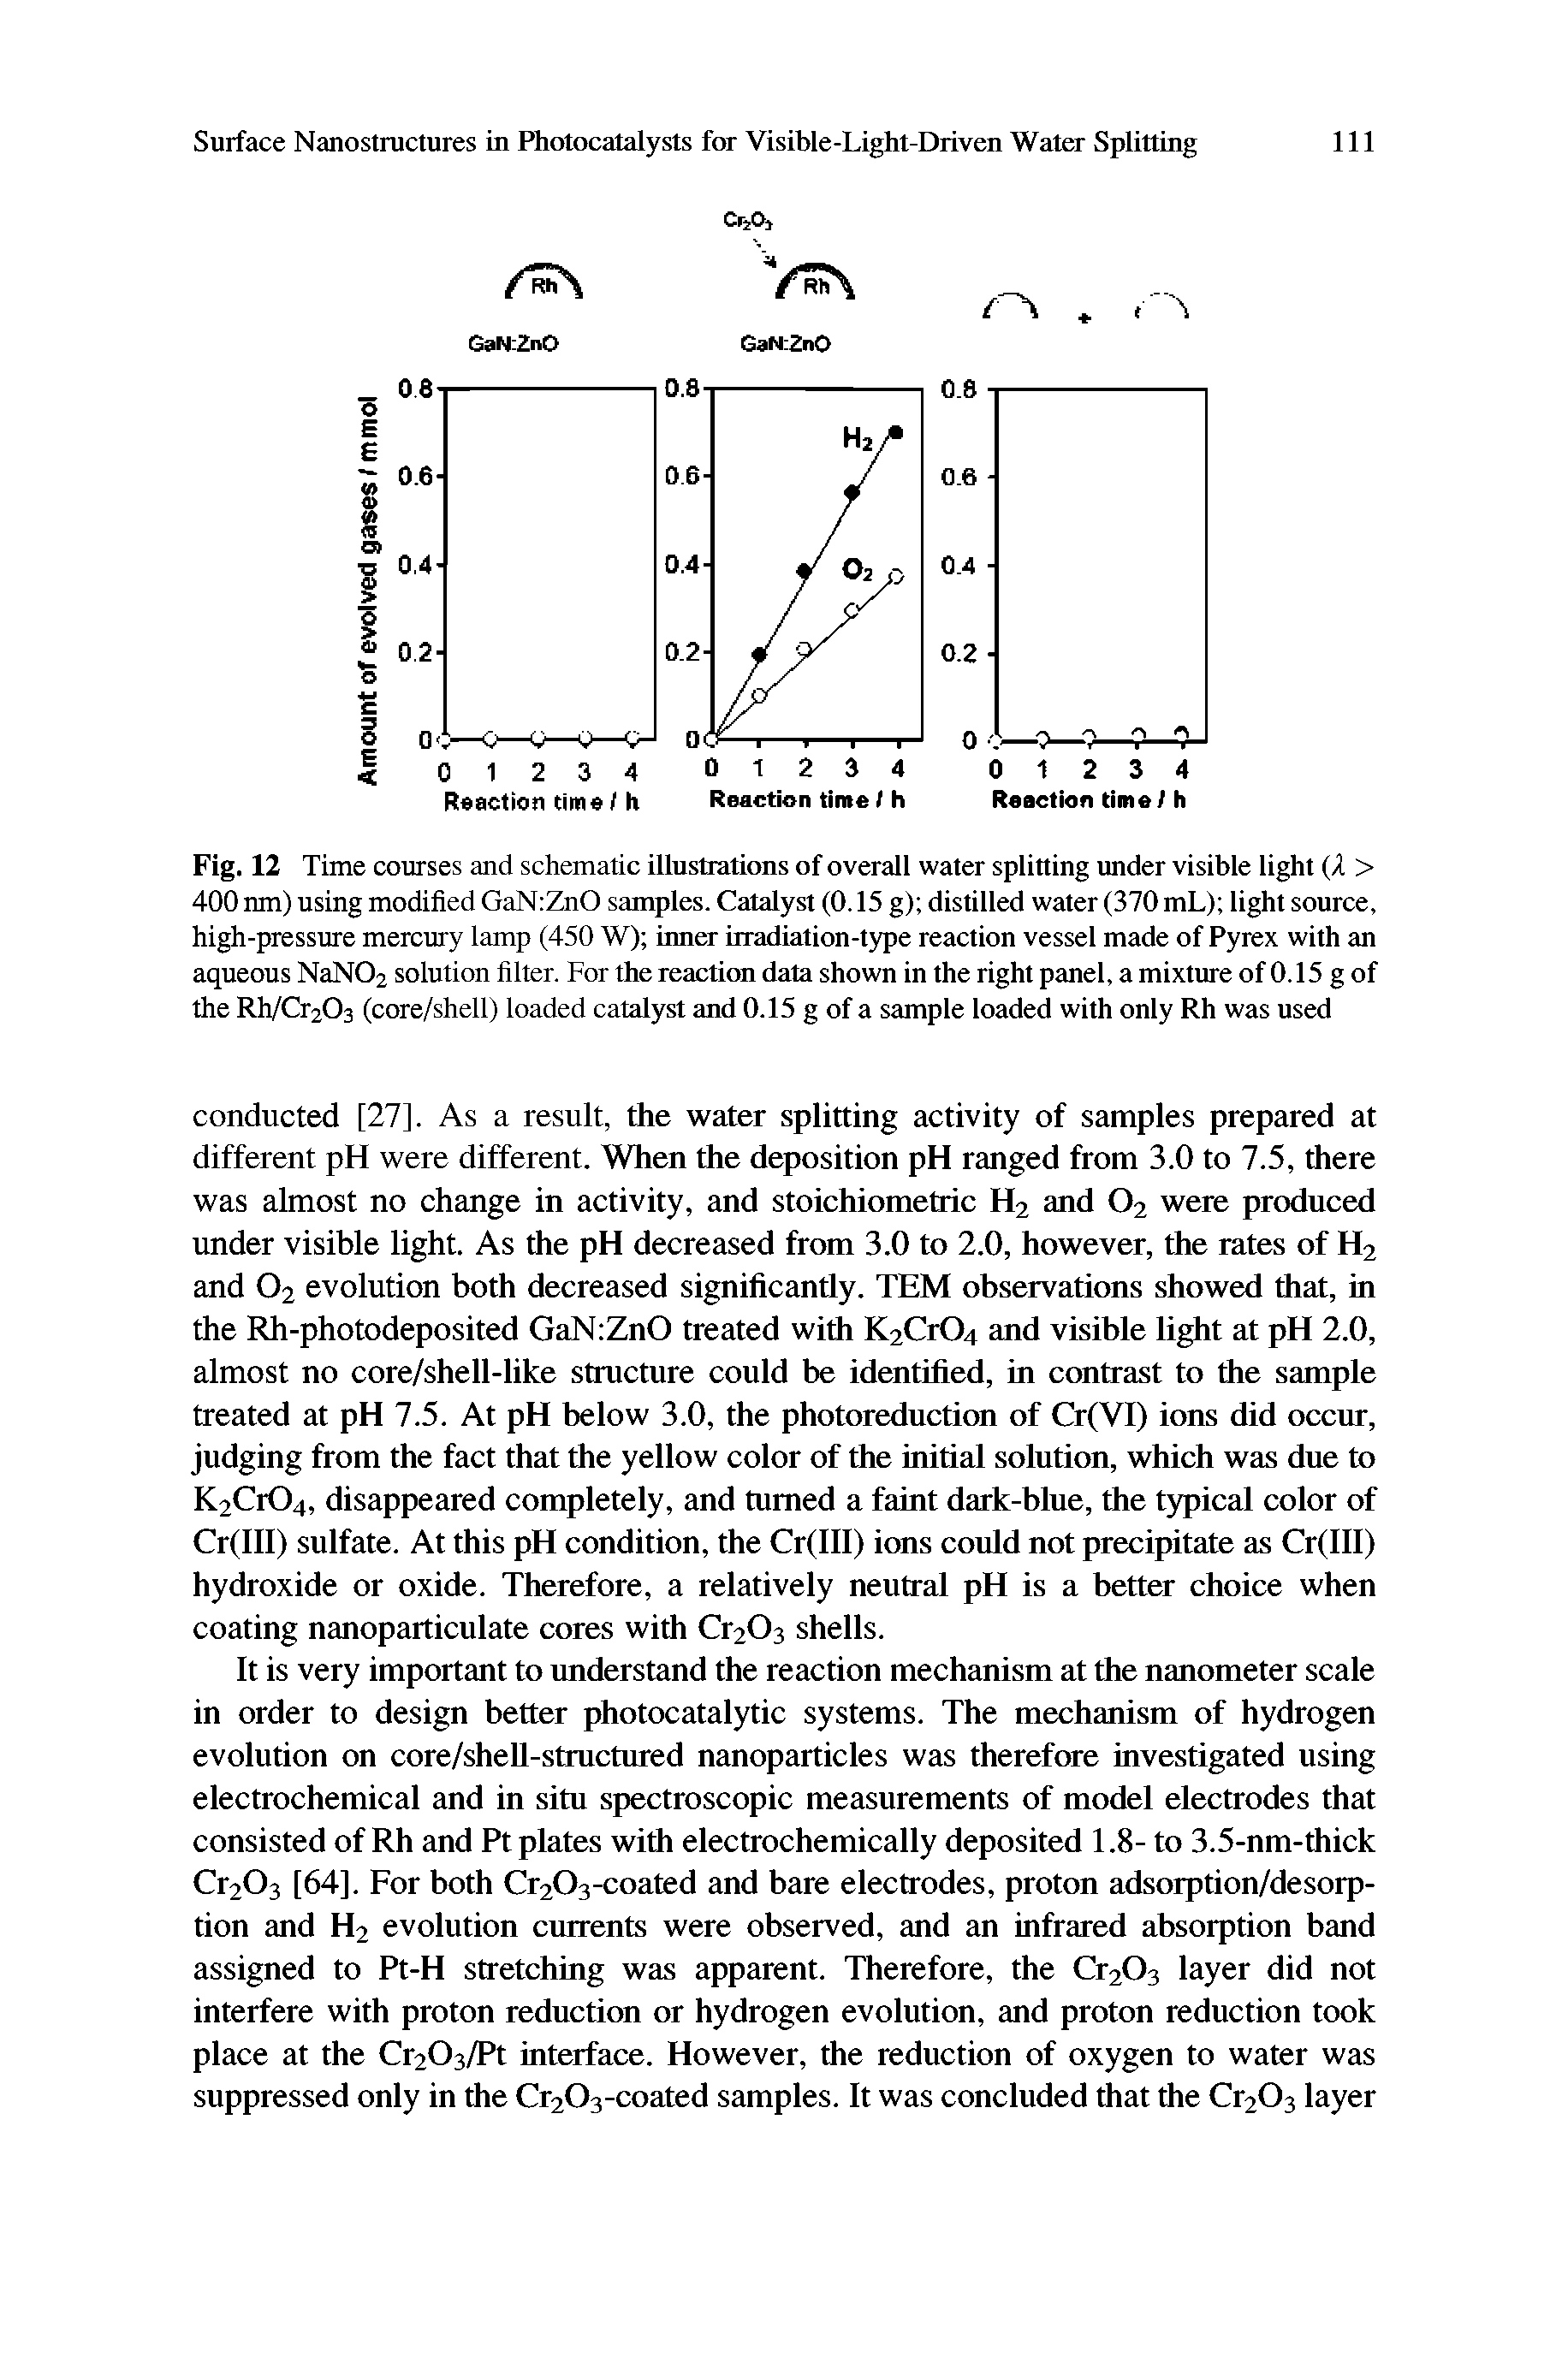 Fig. 12 Time courses and schematic illustrations of overall water splitting tmder visible light (2 > 400 nm) using modified GaN ZnO samples. Catalyst (0.15 g) distilled water (370 mL) light source, high-pressure mercury lamp (450 W) inner irradiation-type reaction vessel made of Pyrex with an aqueous NaN02 solution filter. For the reaction data shown in the right panel, a mixttffe of 0.15 g of the Rh/Cr203 (core/shell) loaded catalyst and 0.15 g of a sample loaded with only Rh was used...